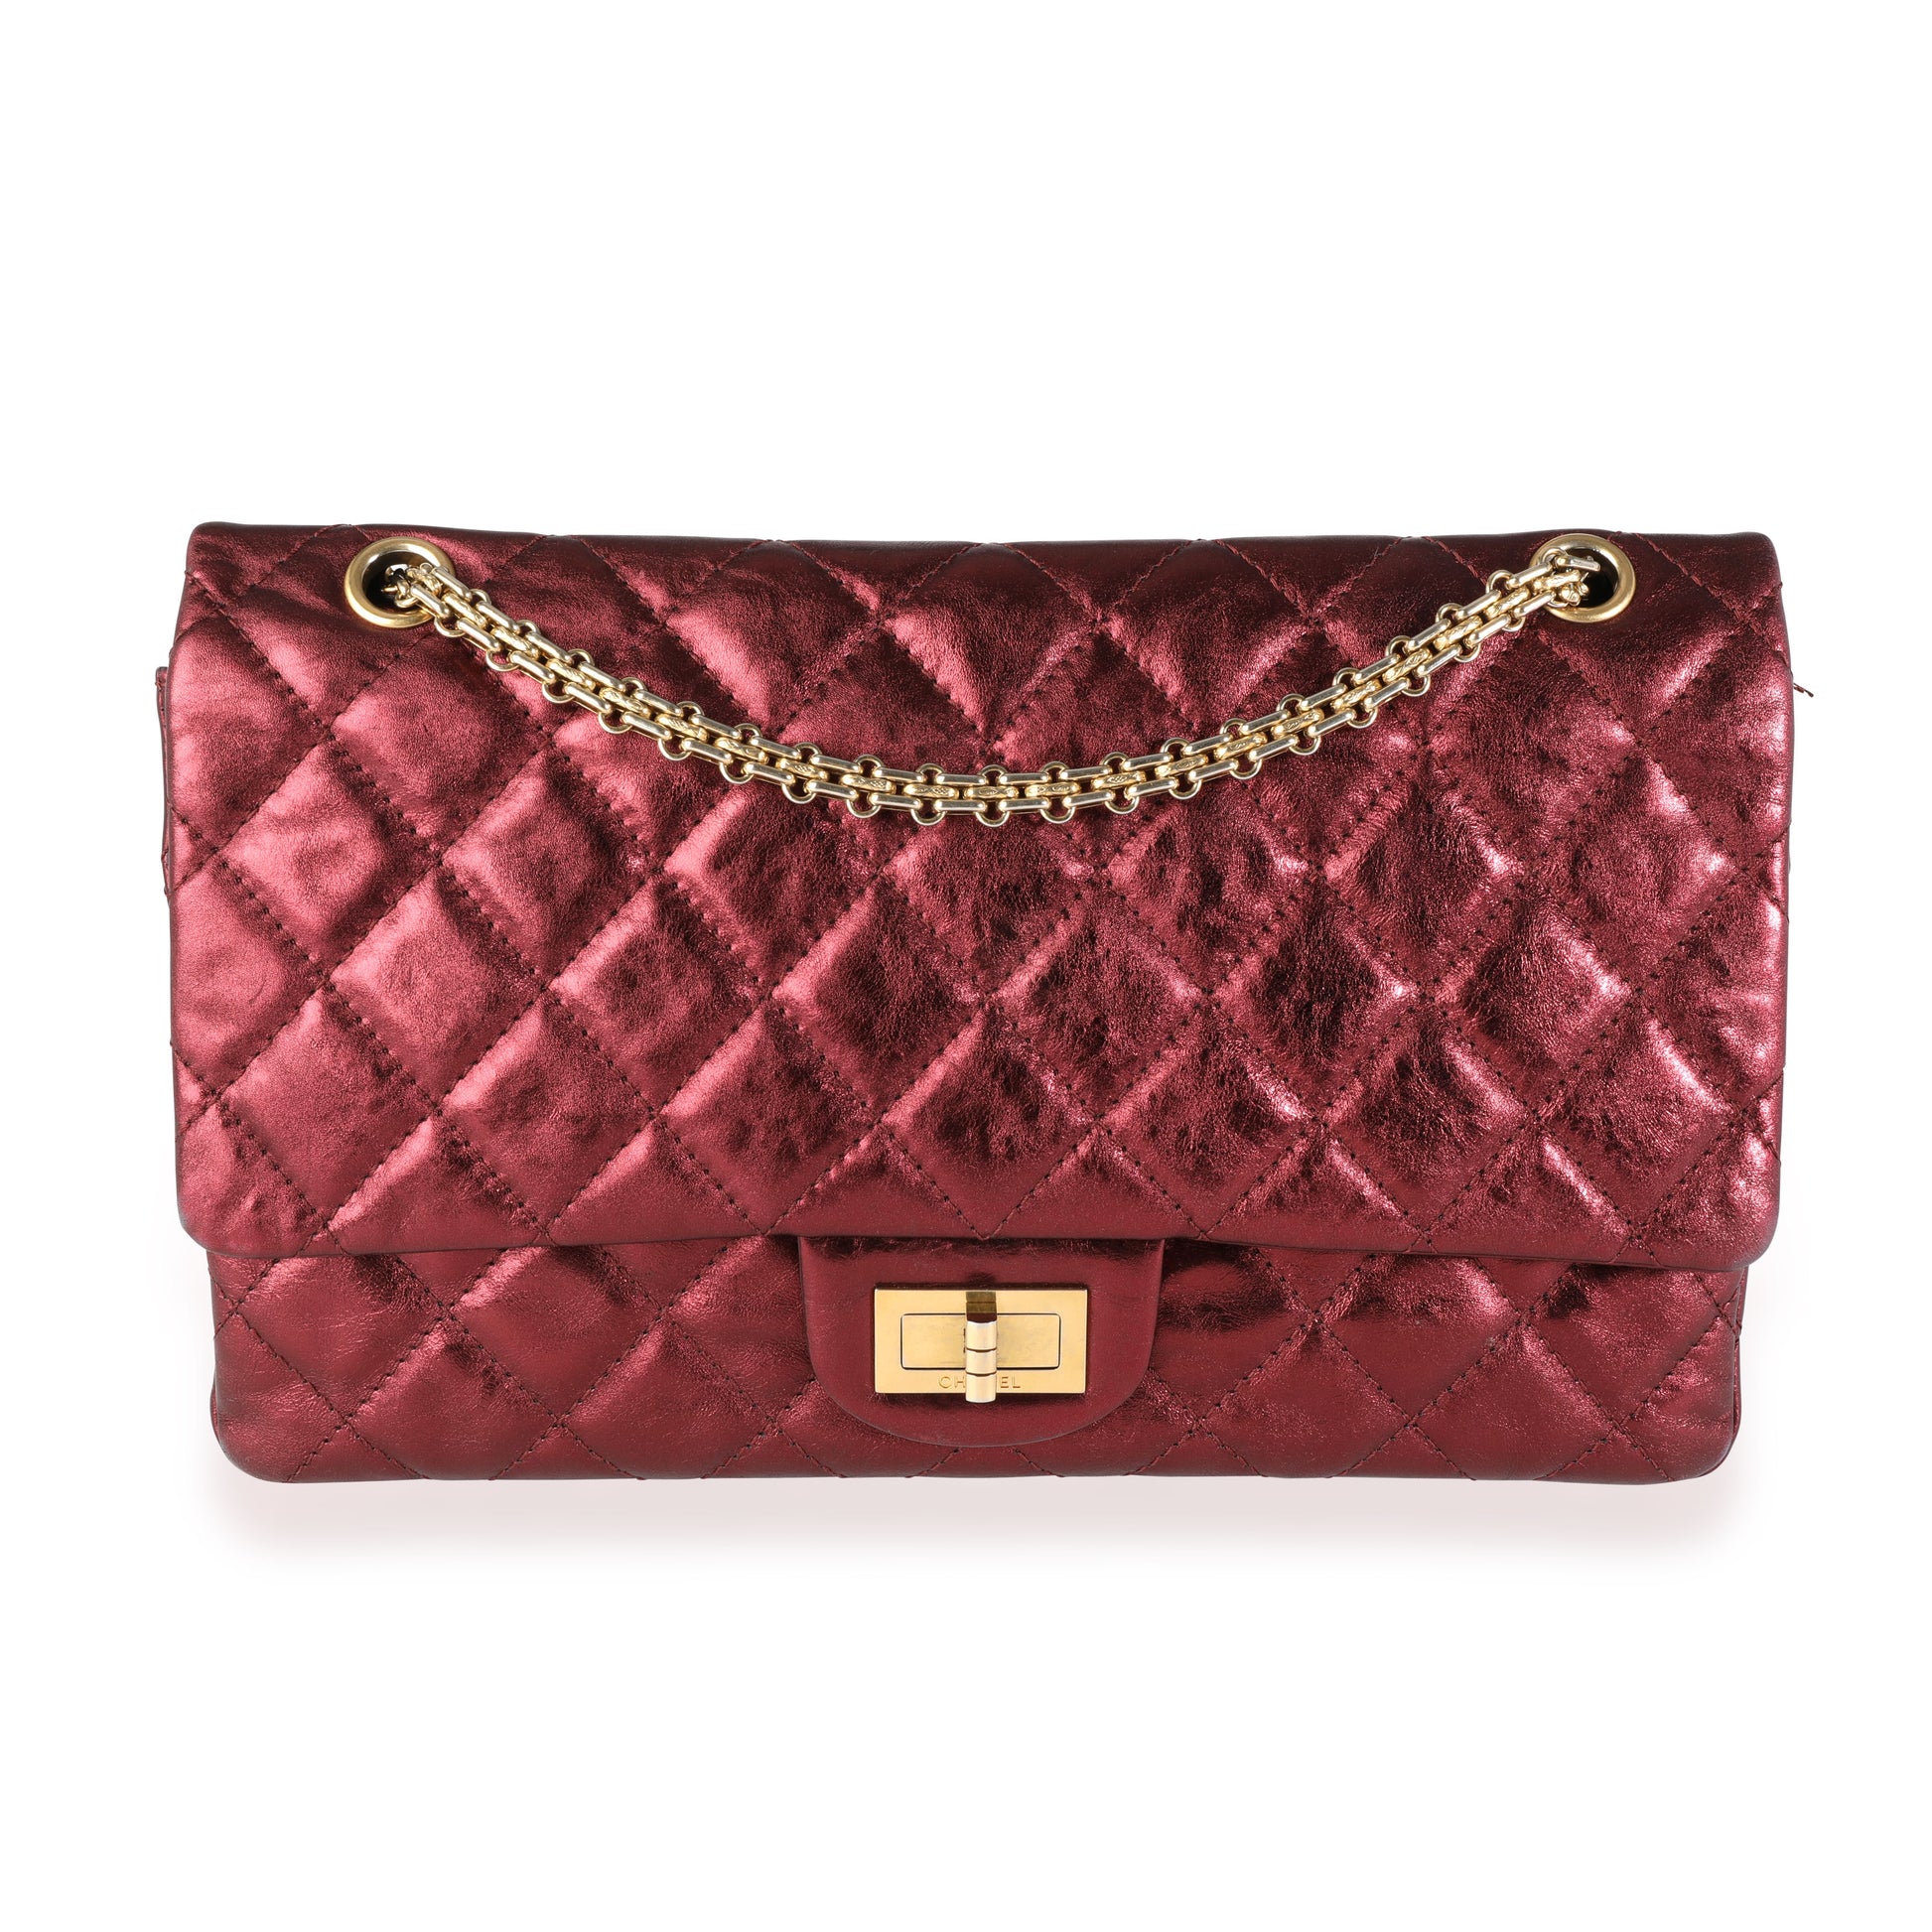 Chanel Gold 2.55 Reissue Quilted Classic Calfskin Leather 227